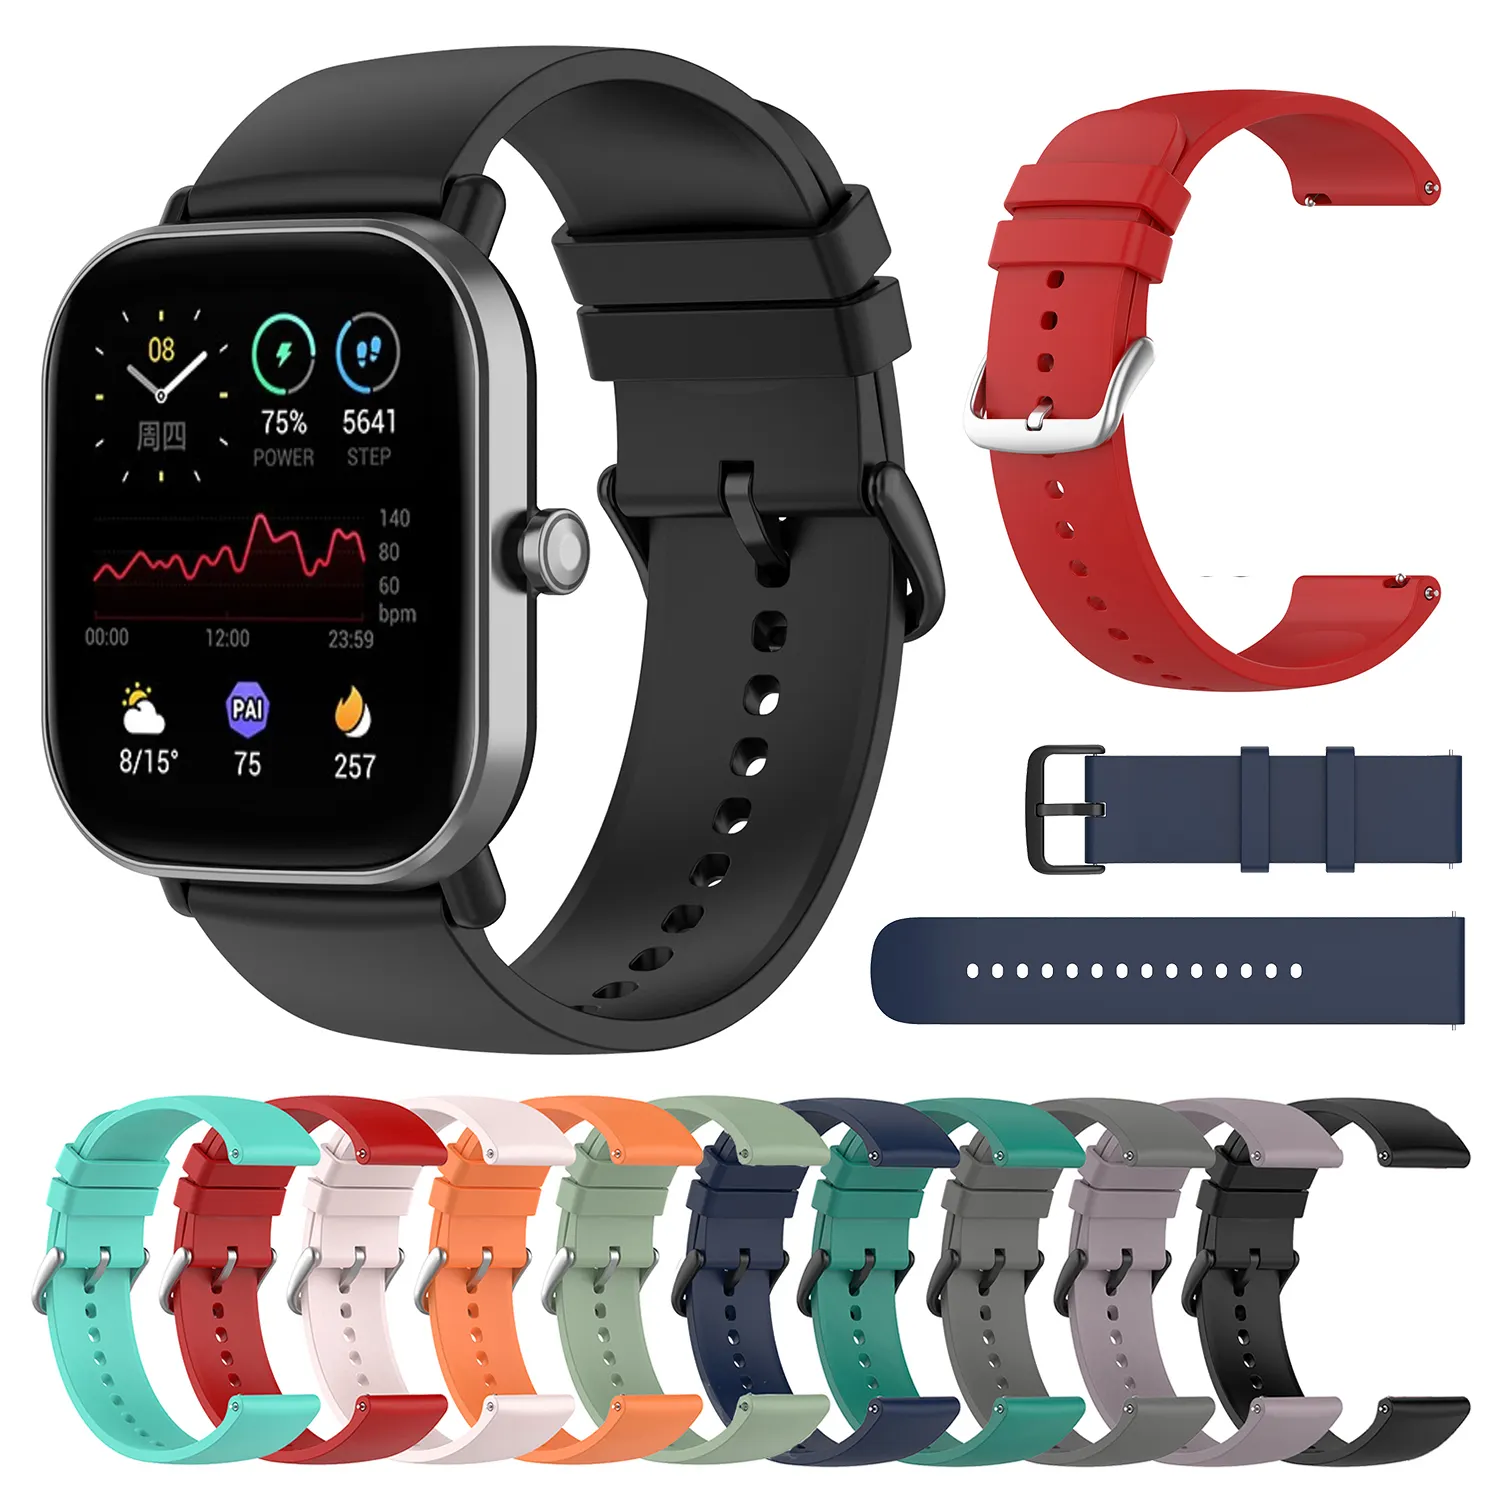 20mm Silicone Strap For Xiaomi Huami Amazfit GTS 3 2 2e GTS 2 Mini Smart Watch Band For Huami Amazfit Bip